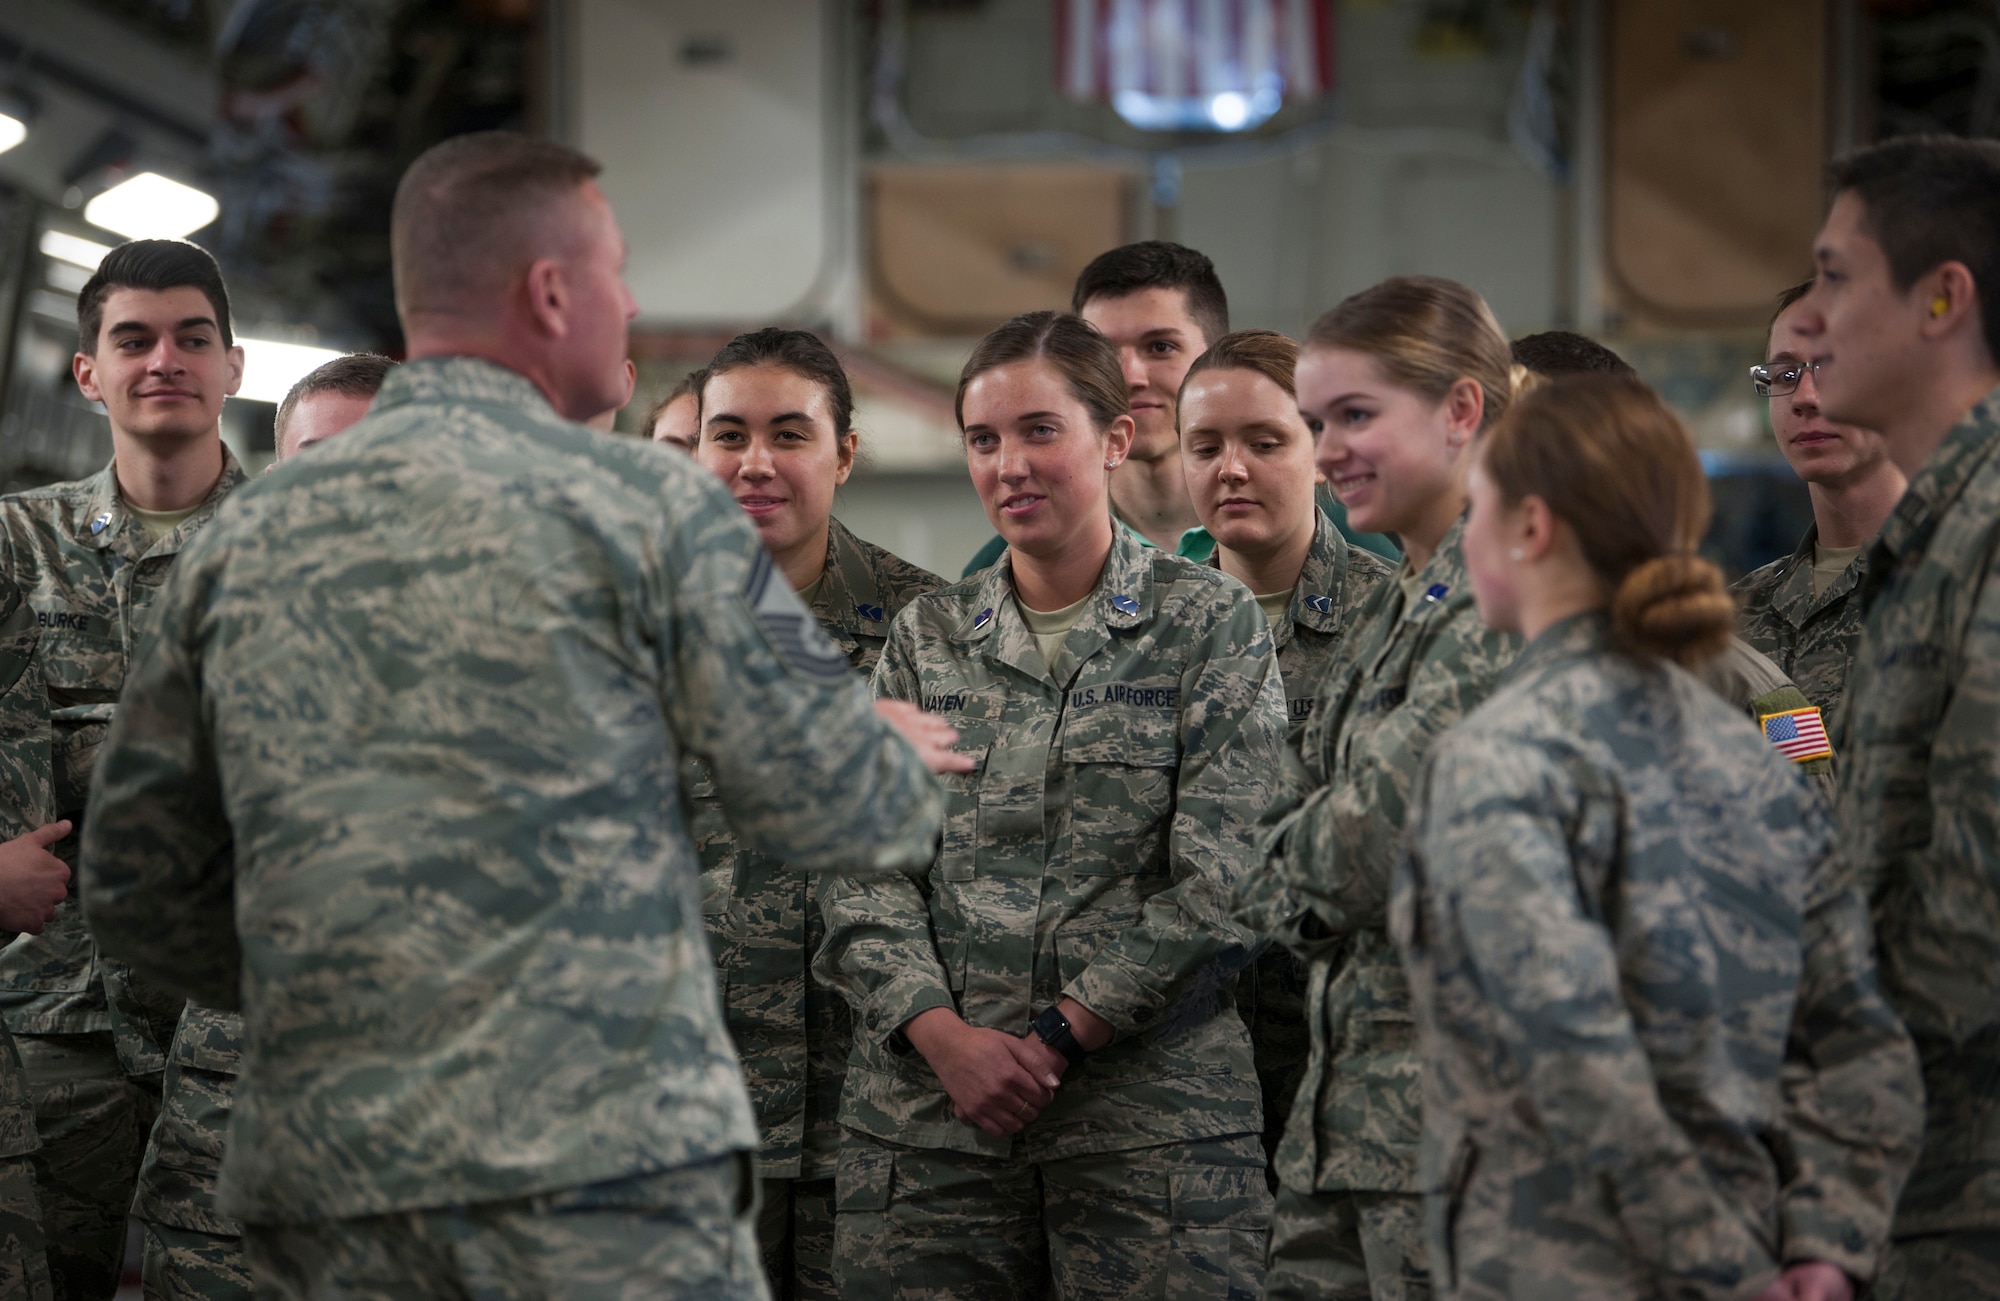 U.S. Air Force Senior Master Sgt. Byron Hayes, the career assistance advisor assigned to the 6th Force Support Squadron at MacDill Air Force Base, Fla., instructs Air Force Reserve Officer Training Corps cadets from Detachment 640 at Miami University, Ohio, March 19, 2018.